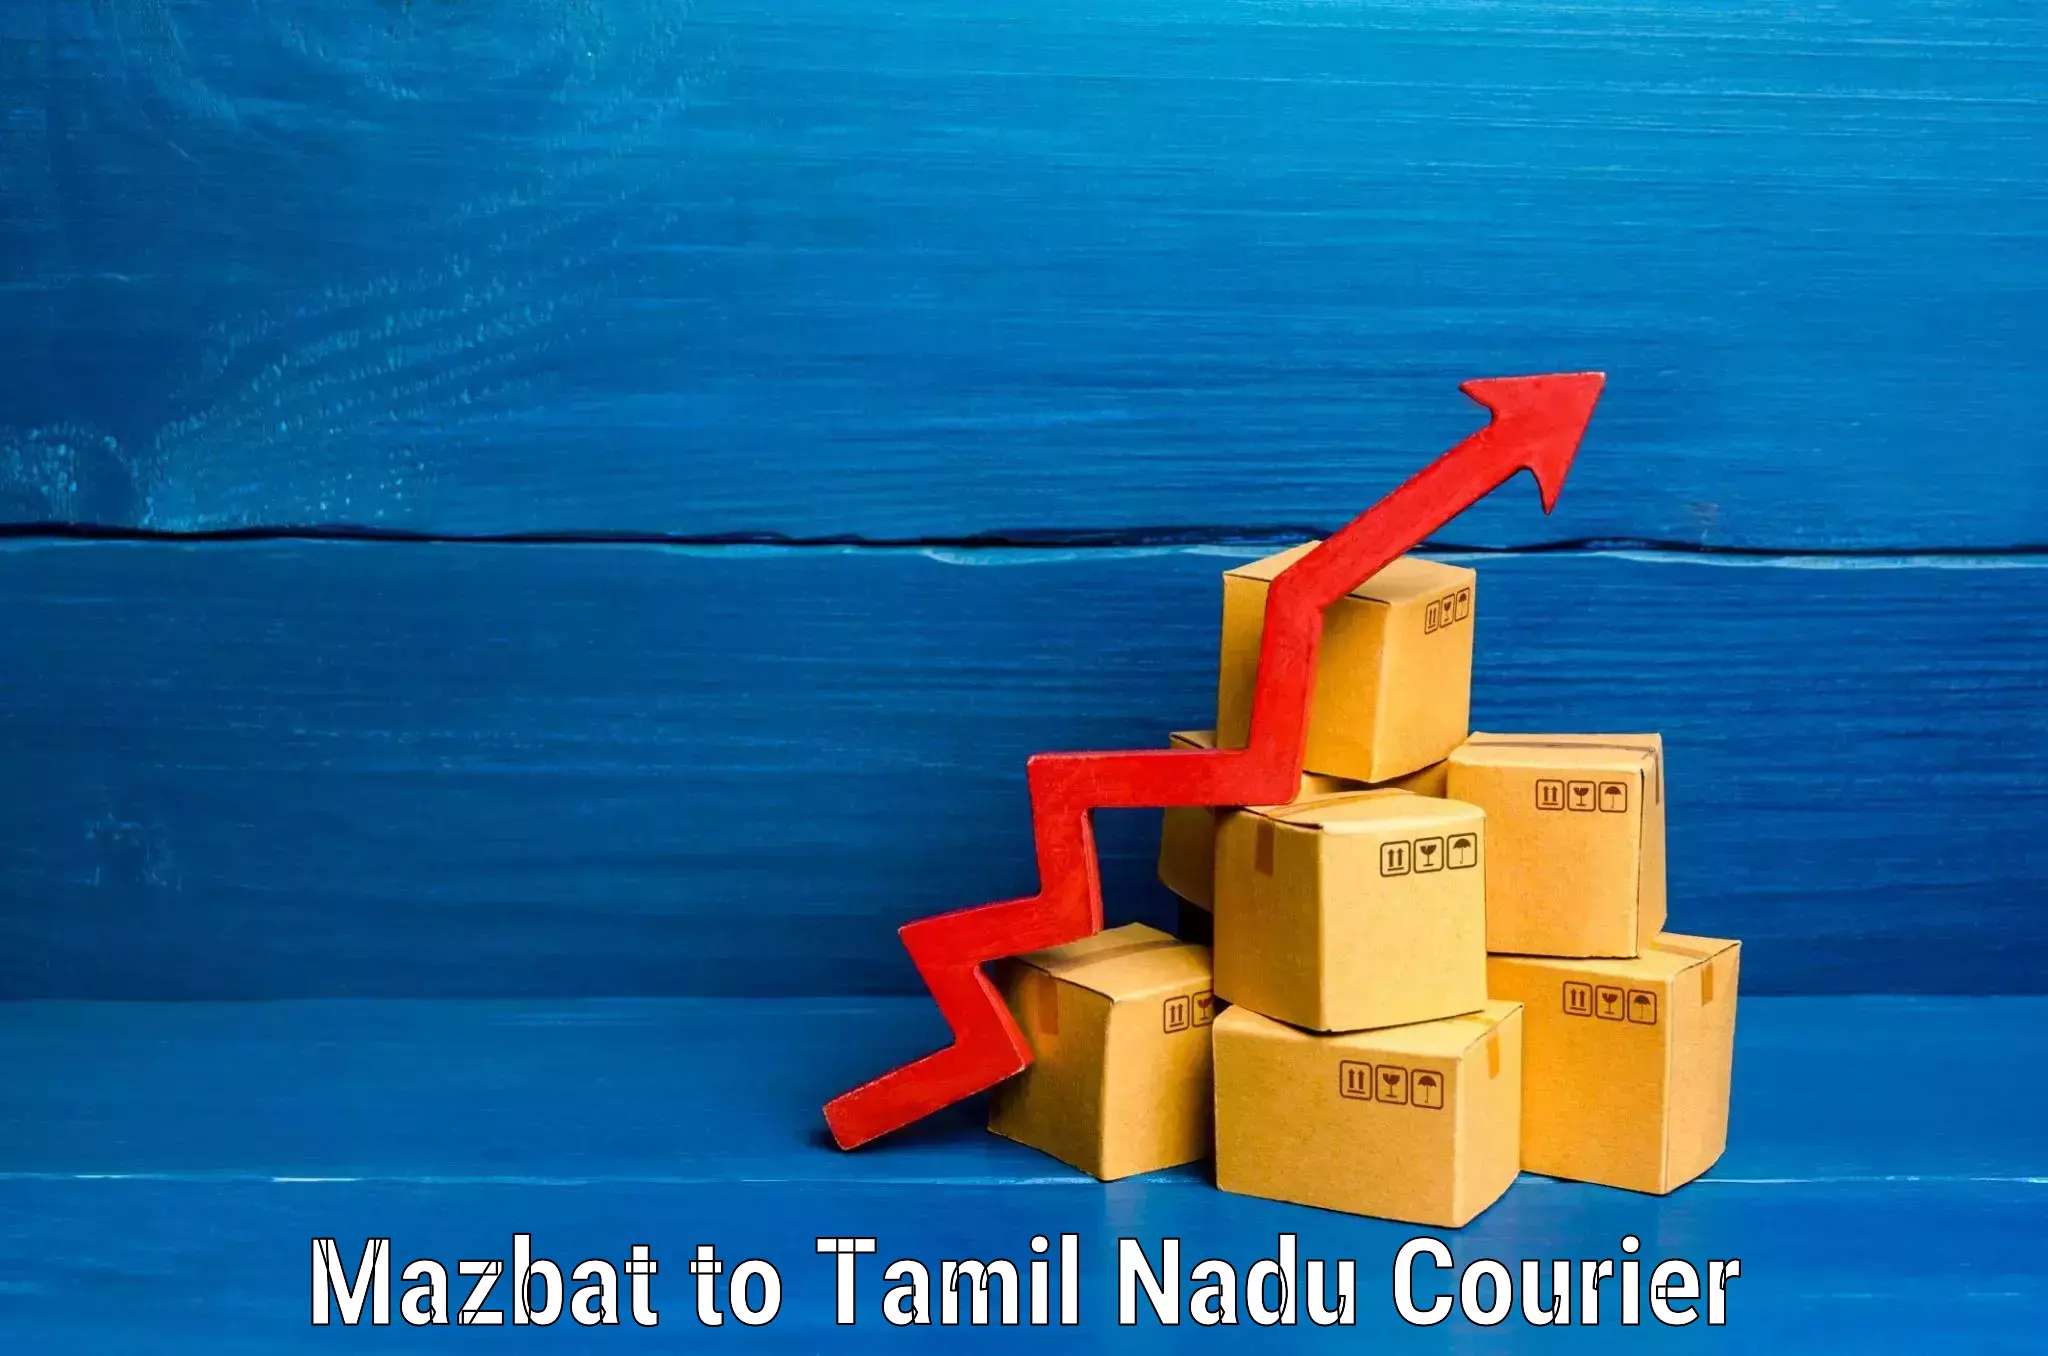 Luggage storage and delivery in Mazbat to Ennore Port Chennai